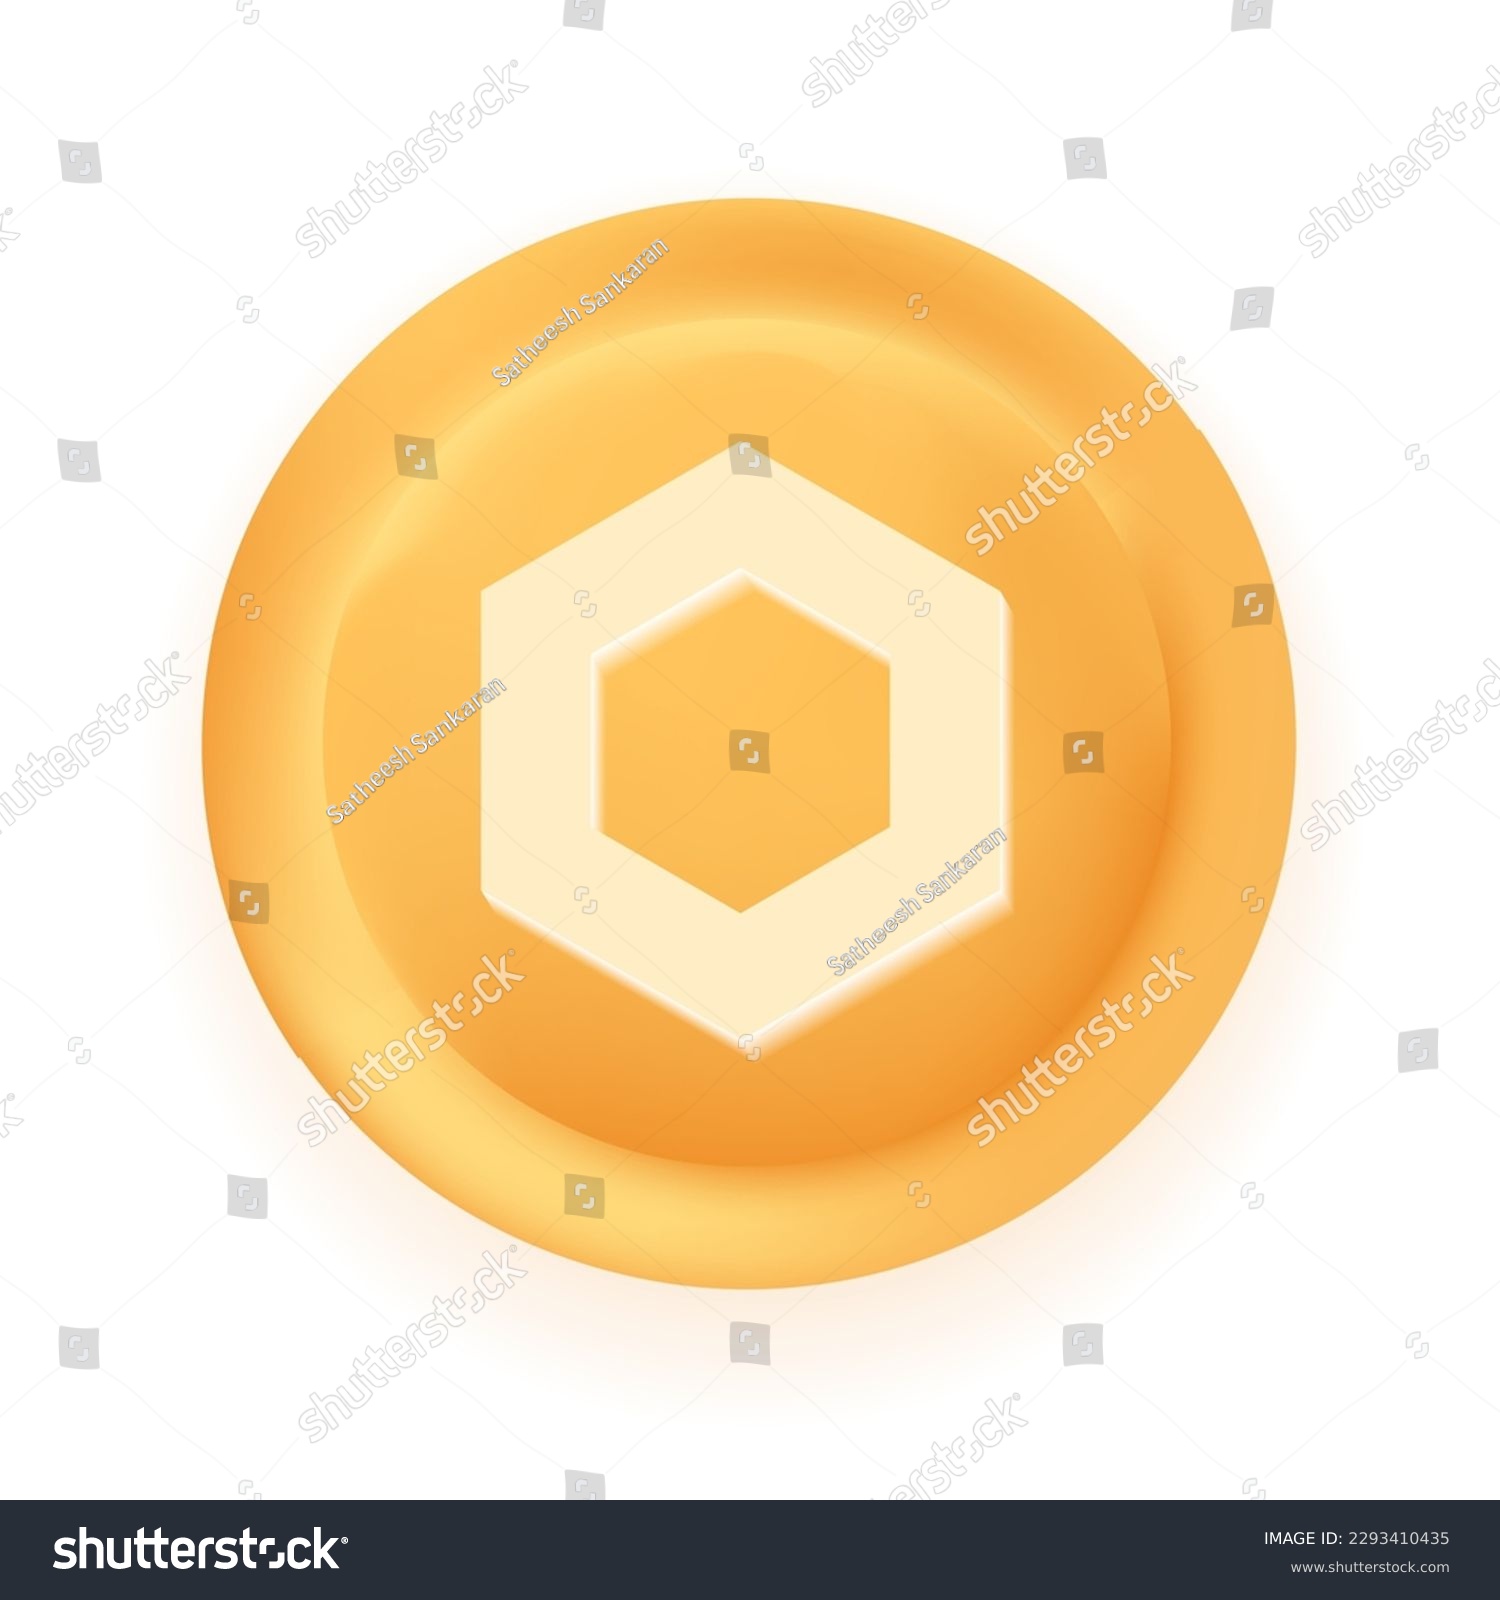 SVG of Chainlink (LINK) crypto currency 3D coin vector illustration isolated on white background. Can be used as virtual money icon, logo, emblem, sticker and badge designs. svg